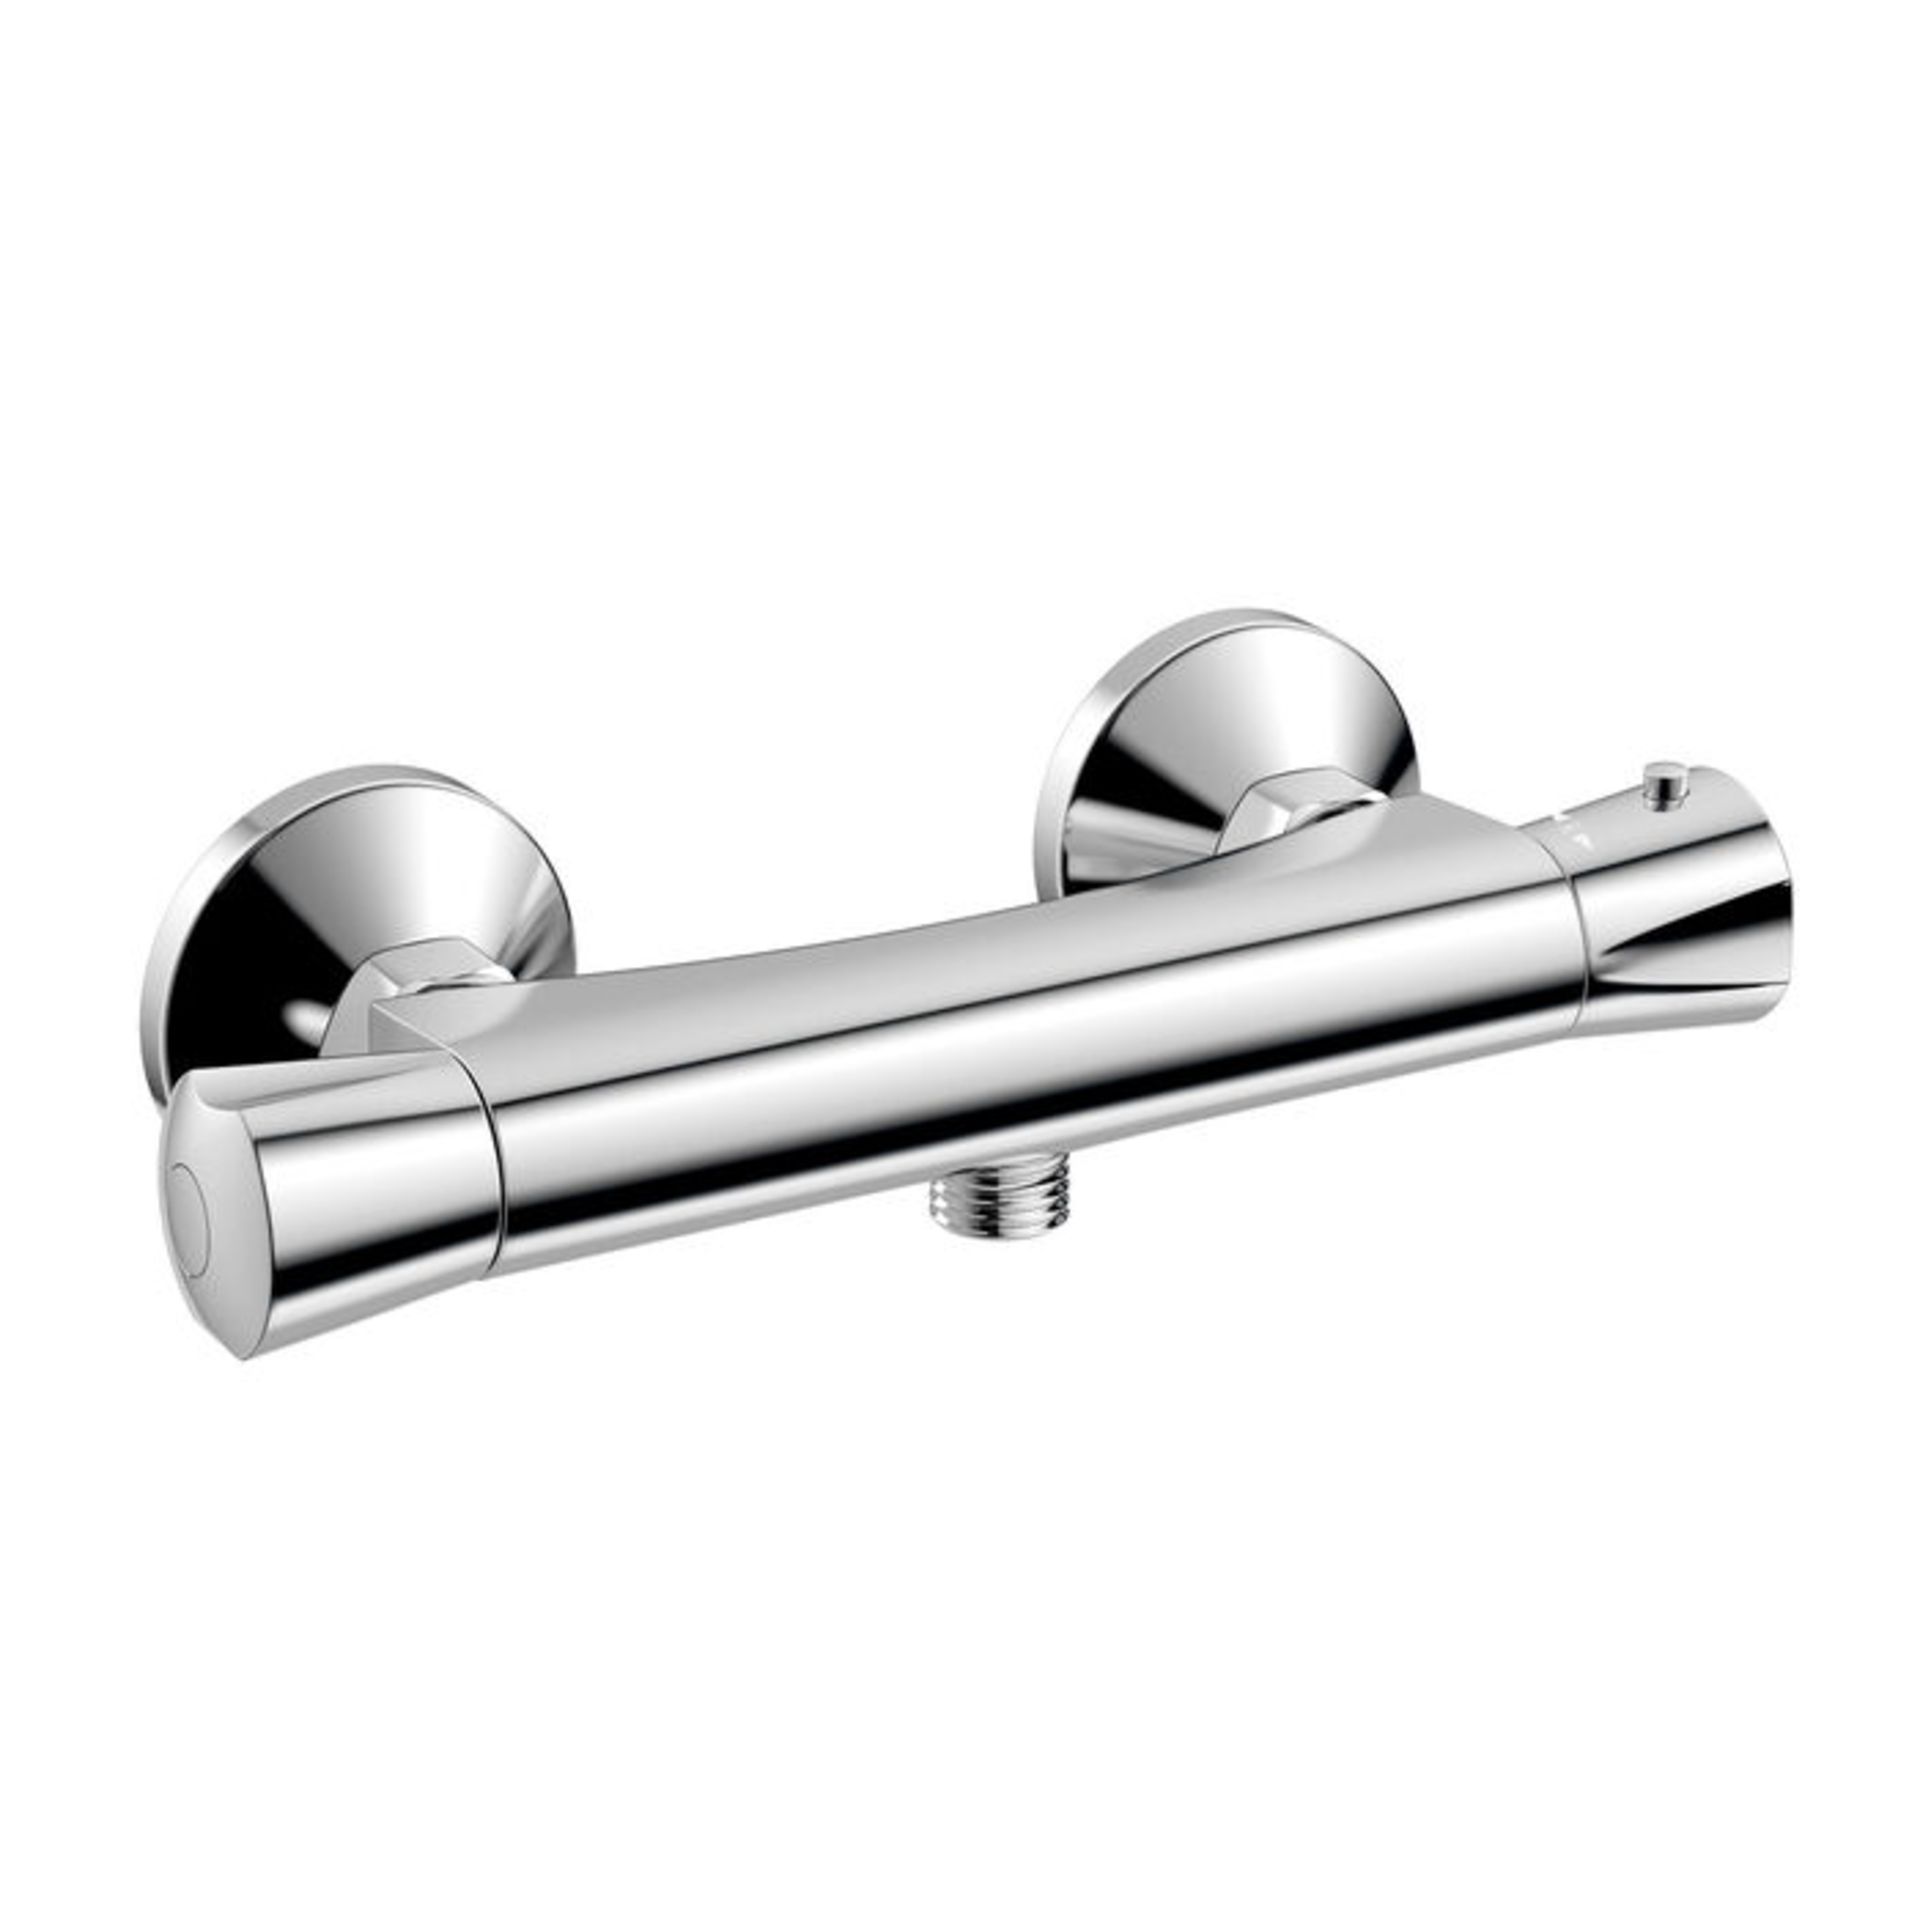 (SU1039) Thermostatic Shower Valve - Round Bar Mixer Chrome plated solid brass mixer Cool to ... - Image 2 of 2